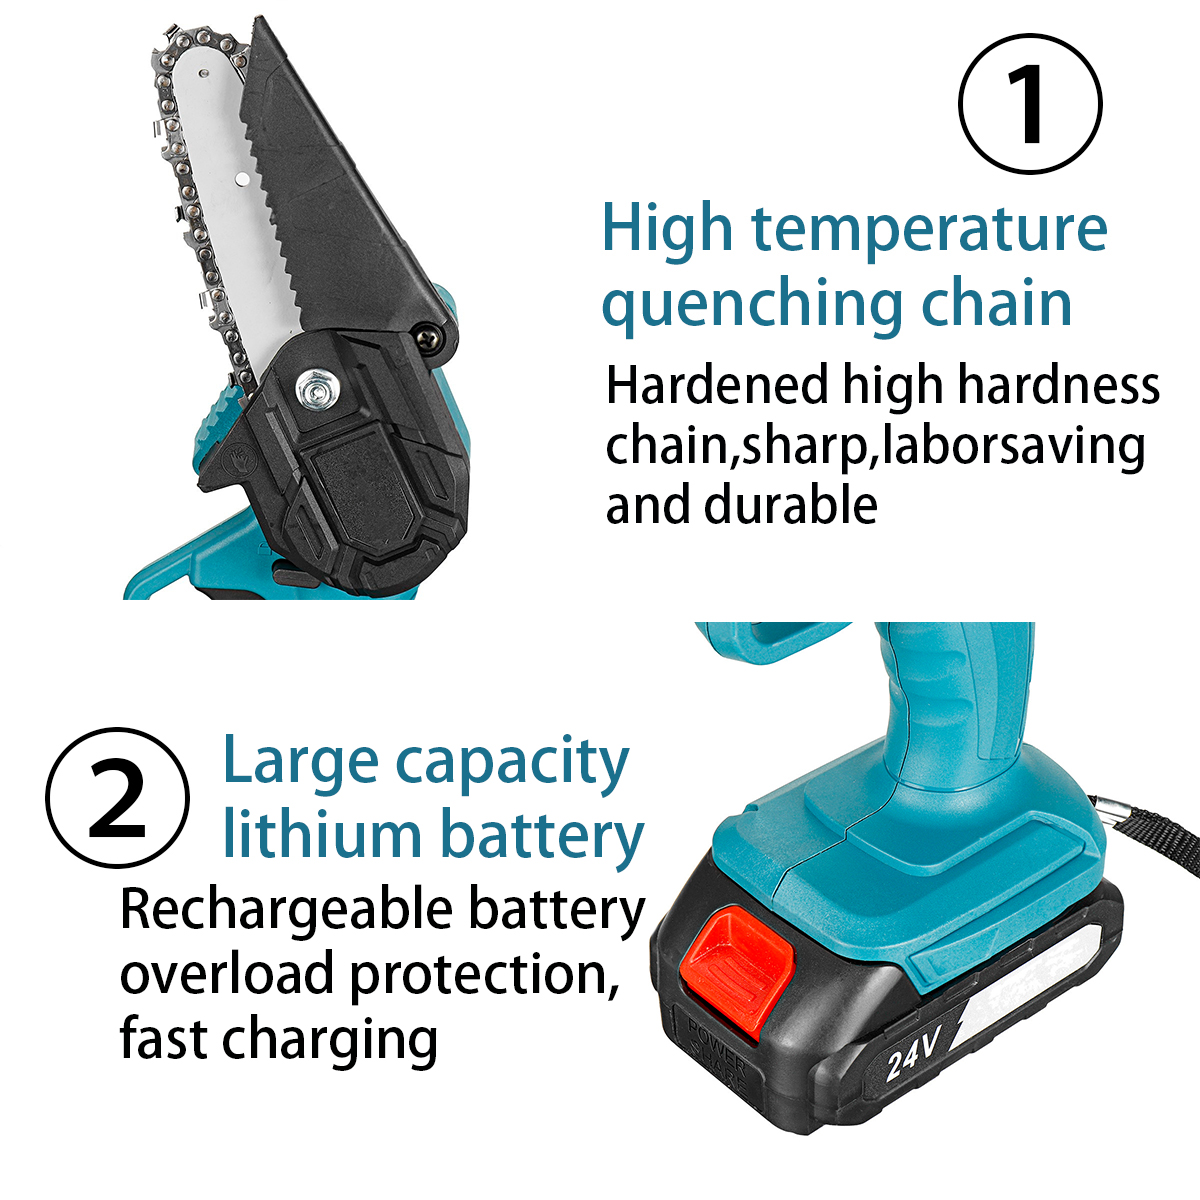 4-Inch-Electric-Chainsaws-Rechargeable-Portable-Chain-Saw-Woodworking-Tool-Wood-Cutter-W-12-Battery-1860314-8